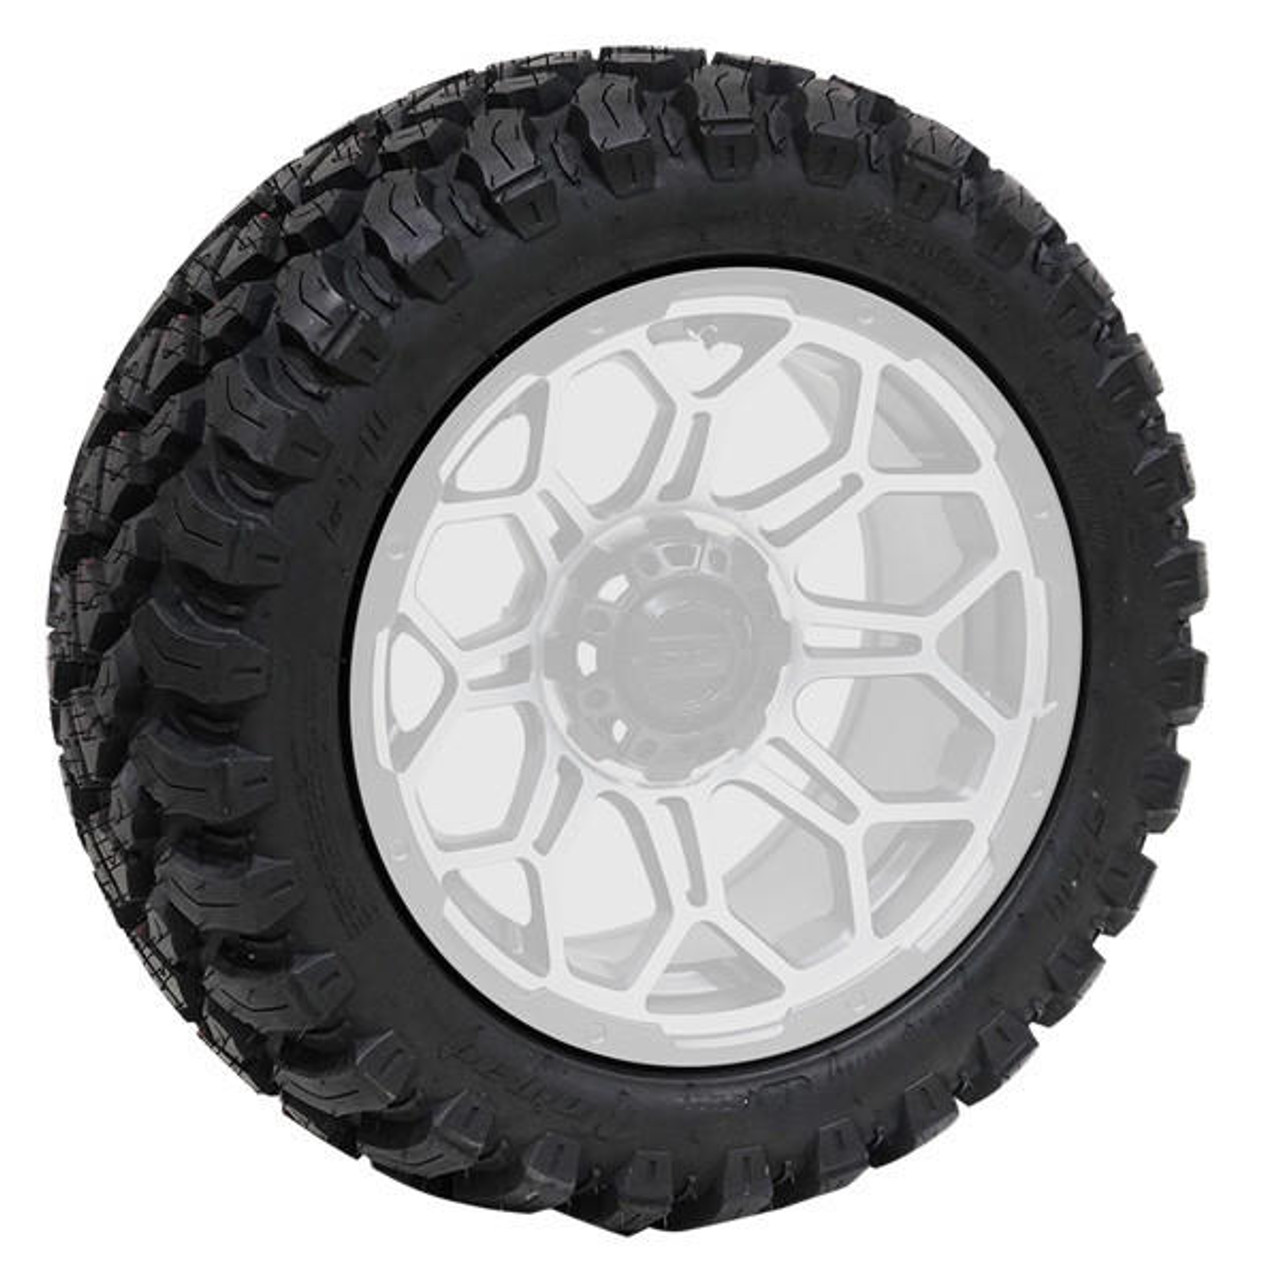 GTW 22x11-R12 GTW Nomad Steel Belted DOT Tire 